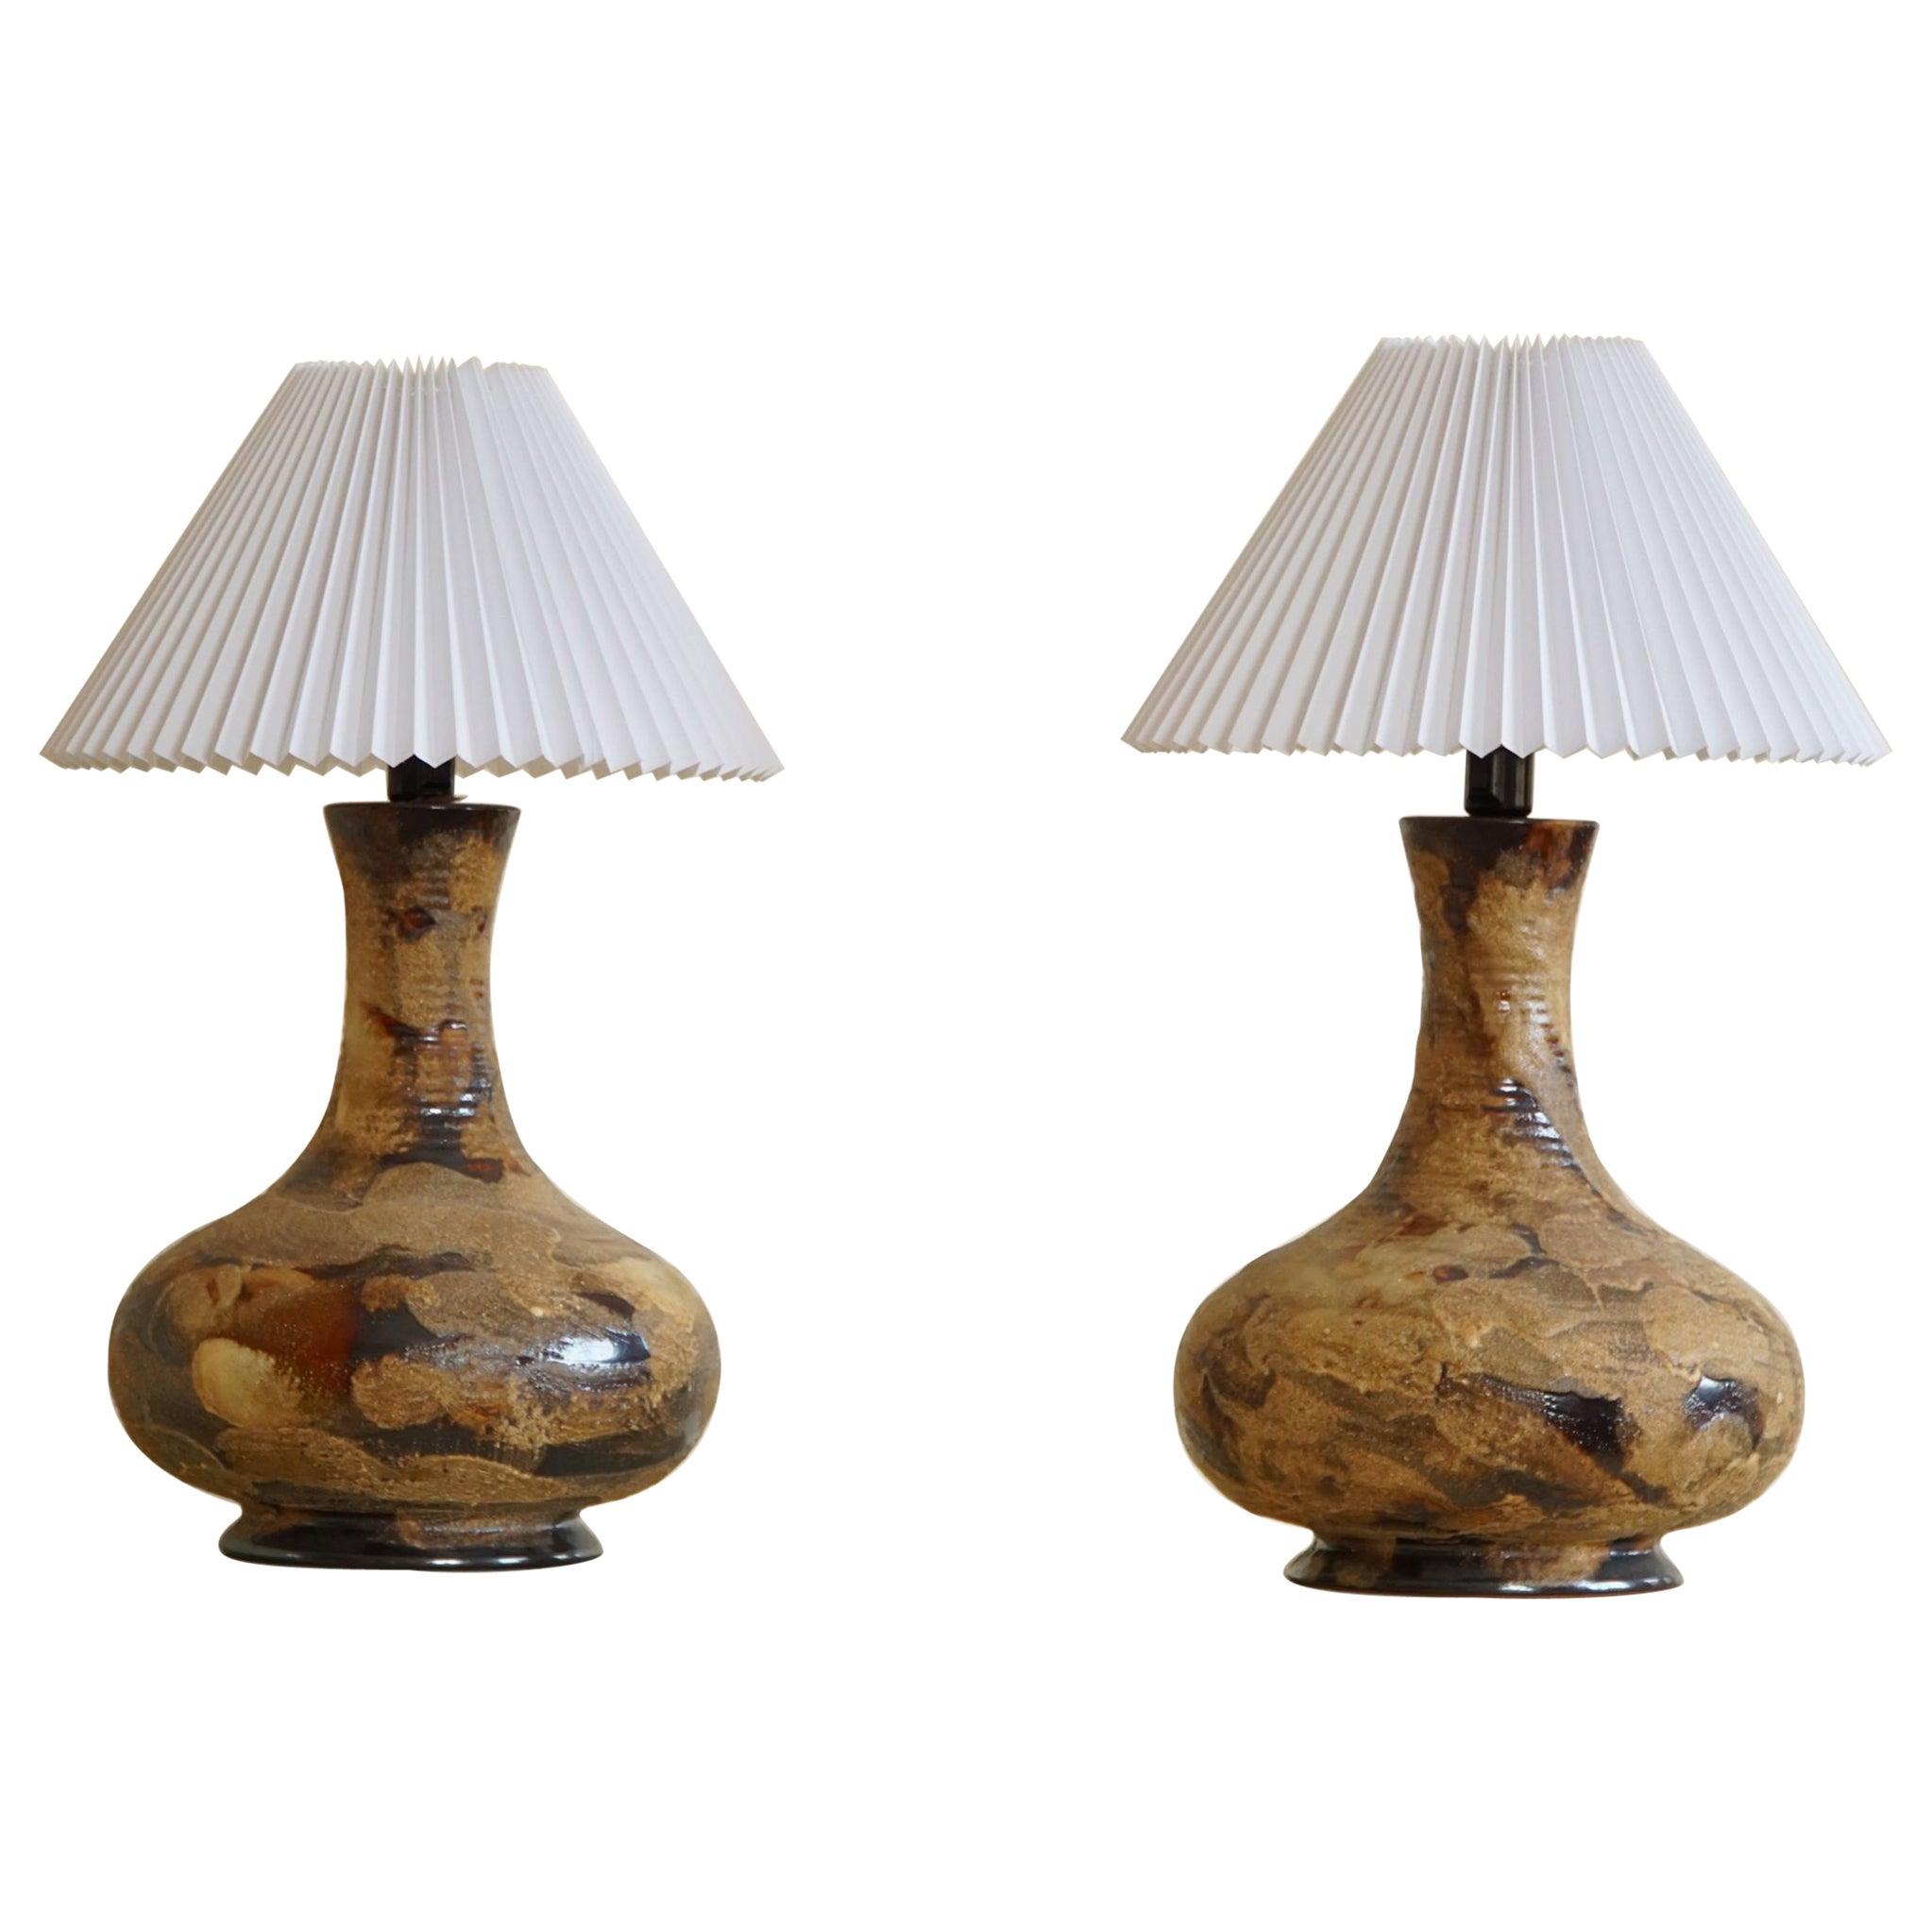 Danish Modern Pair of Large Ceramic Table Lamps, Mid Century, Made in 1970s